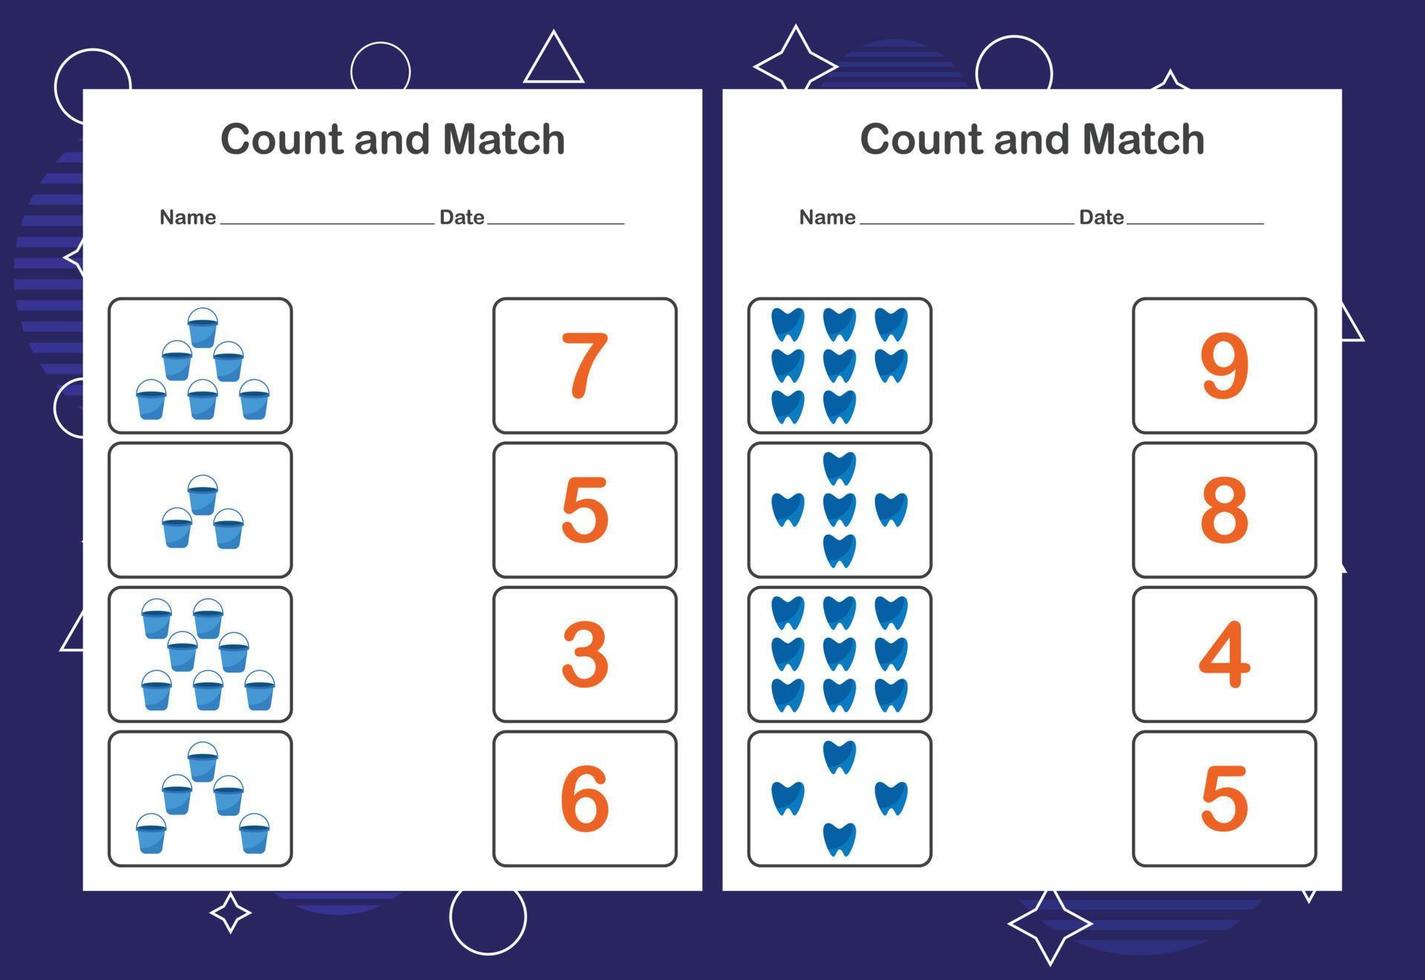 Count and Match worksheet for kids. Count and match with the correct number. Matching education game. vector